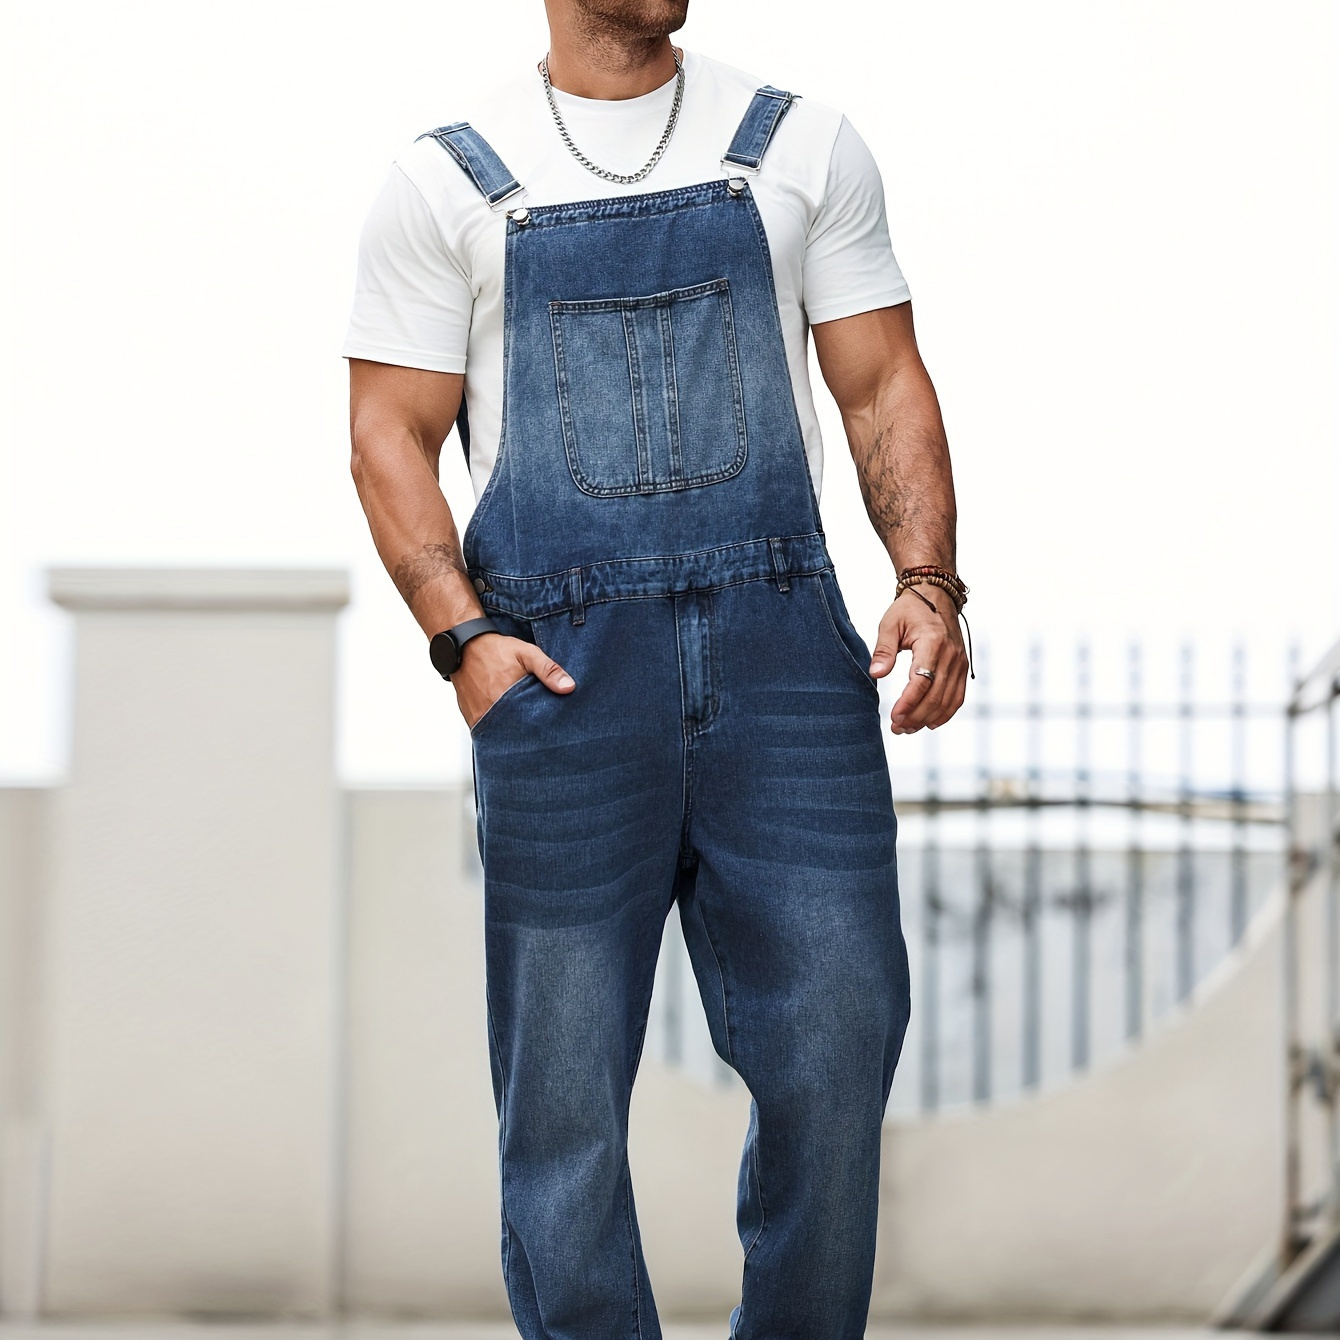 

Men's Plus Size Denim Overalls, Casual Loose Fit Bib Jeans Pants With Large Pockets, Durable Workwear, Fashion Streetwear, Adjustable Straps, Comfortable All-day Wear